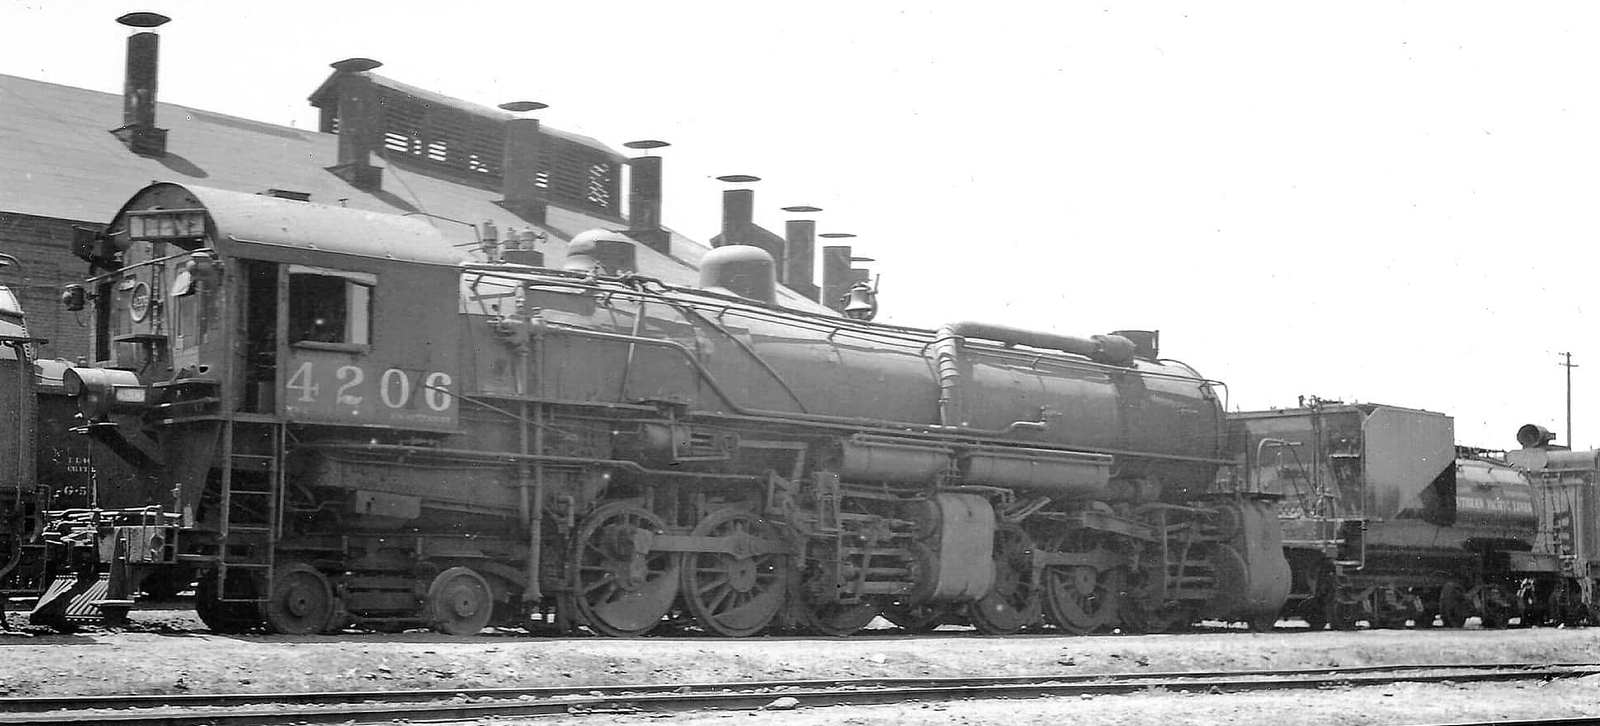 No. 4206 already with bogie but before rebuilding to AM-2